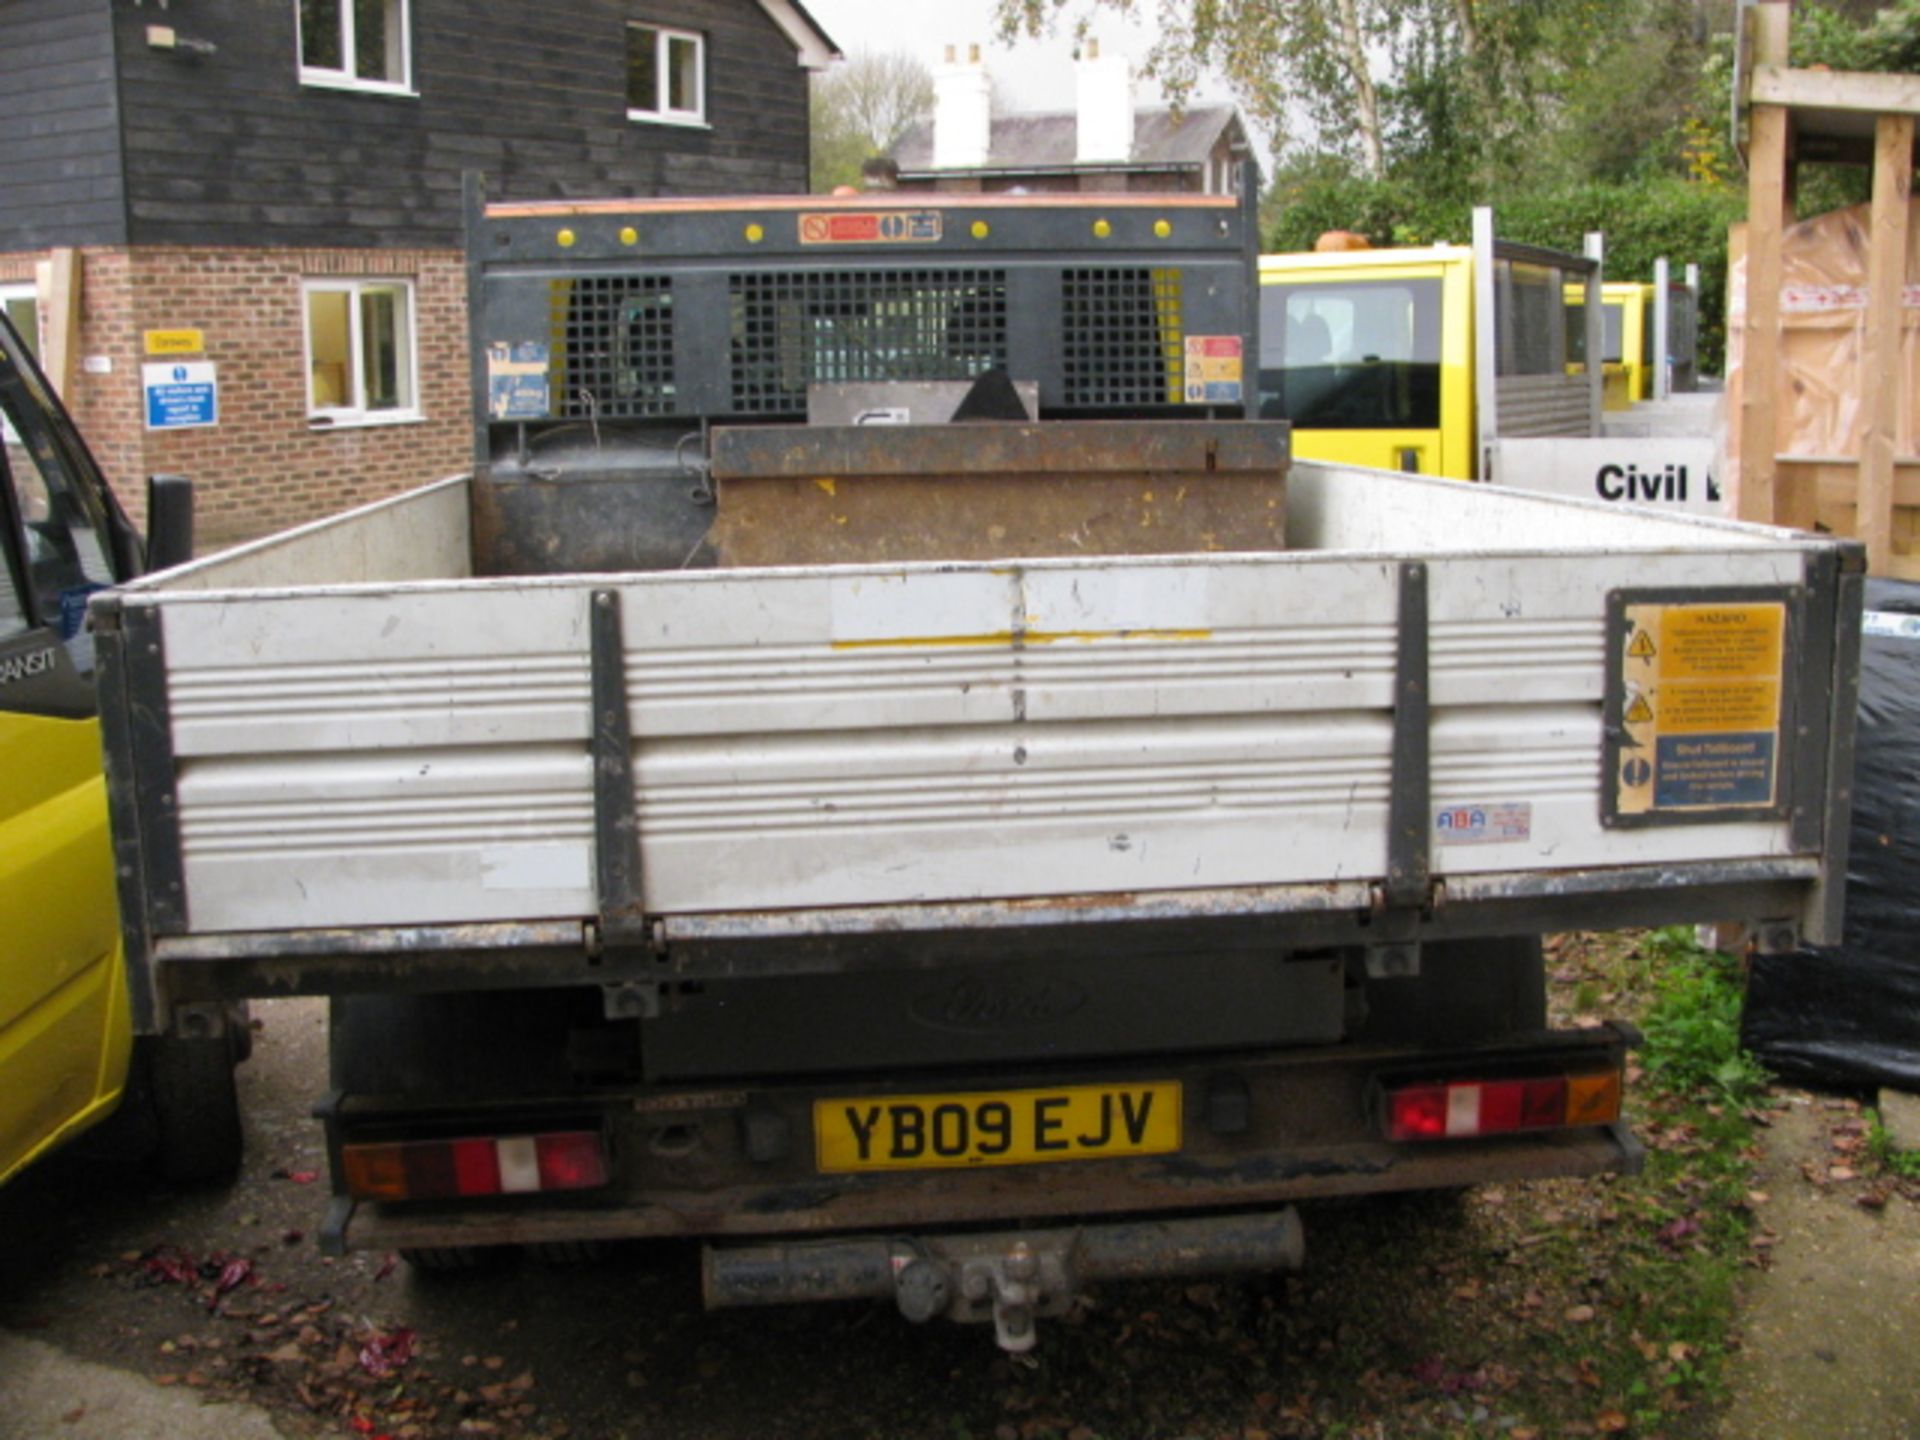 Ford Transit 100 T350 double cab tipper 2009 - Image 7 of 9